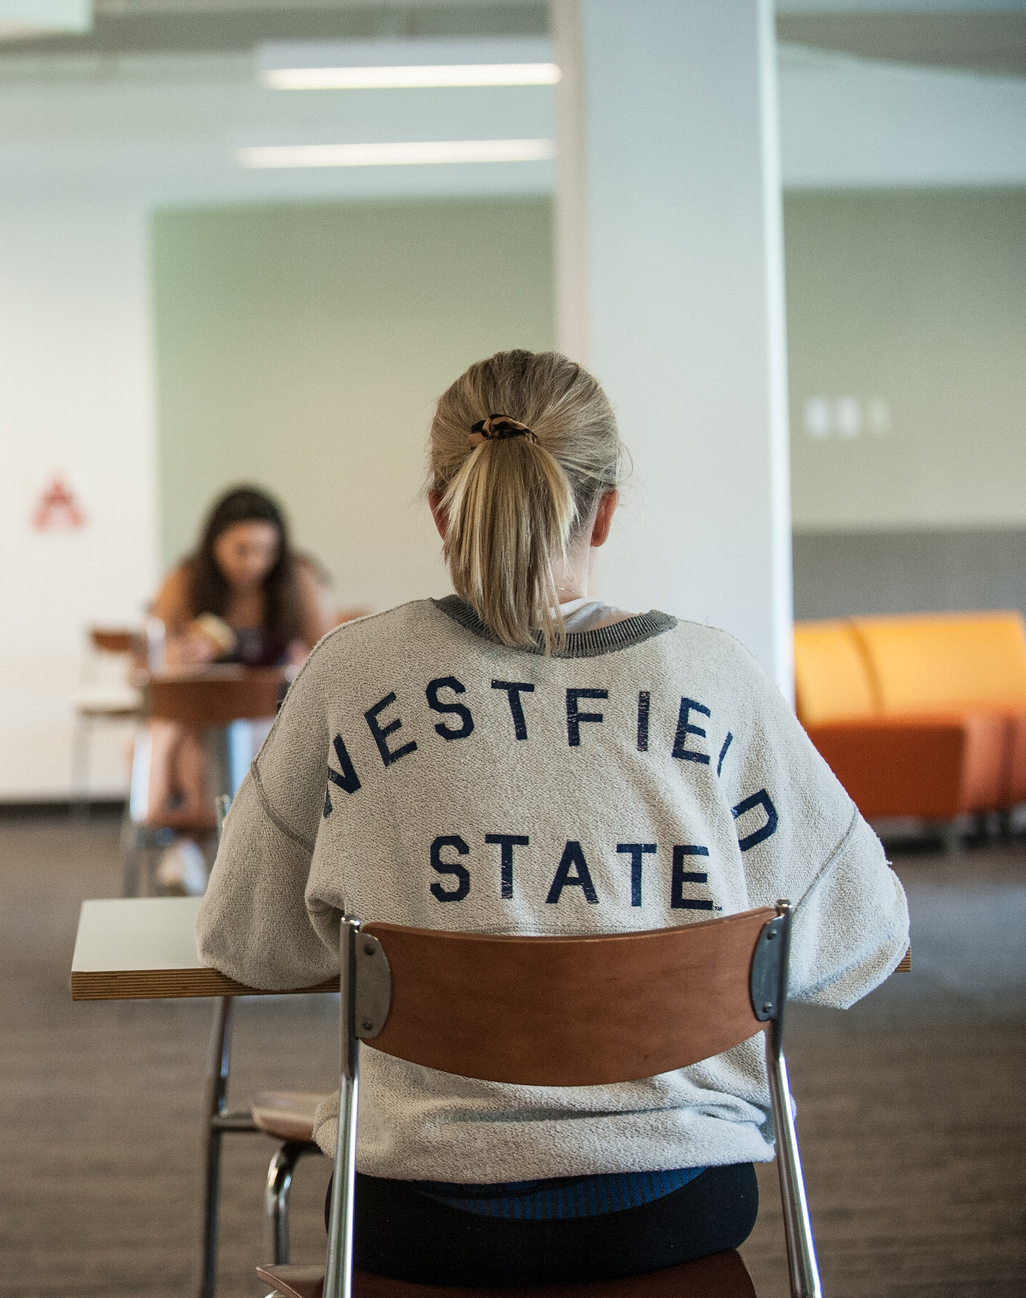 A female student studying and wearing a Westfield State sweatshirt